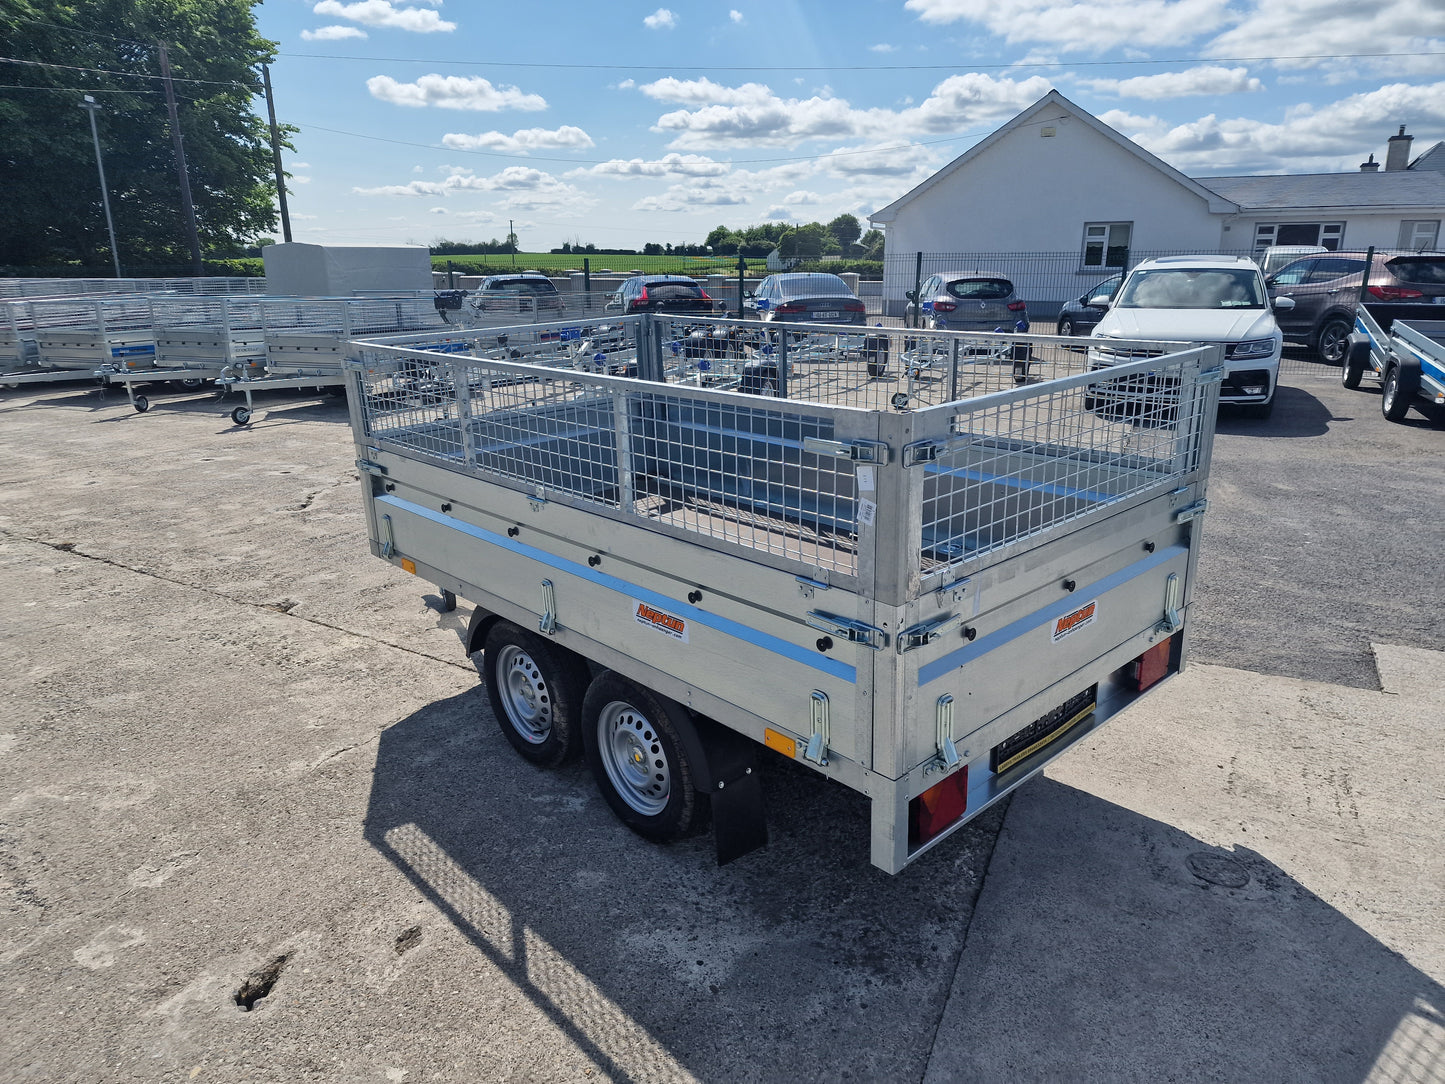 9 x 5 Twin Axle Dropside Trailer with Mesh